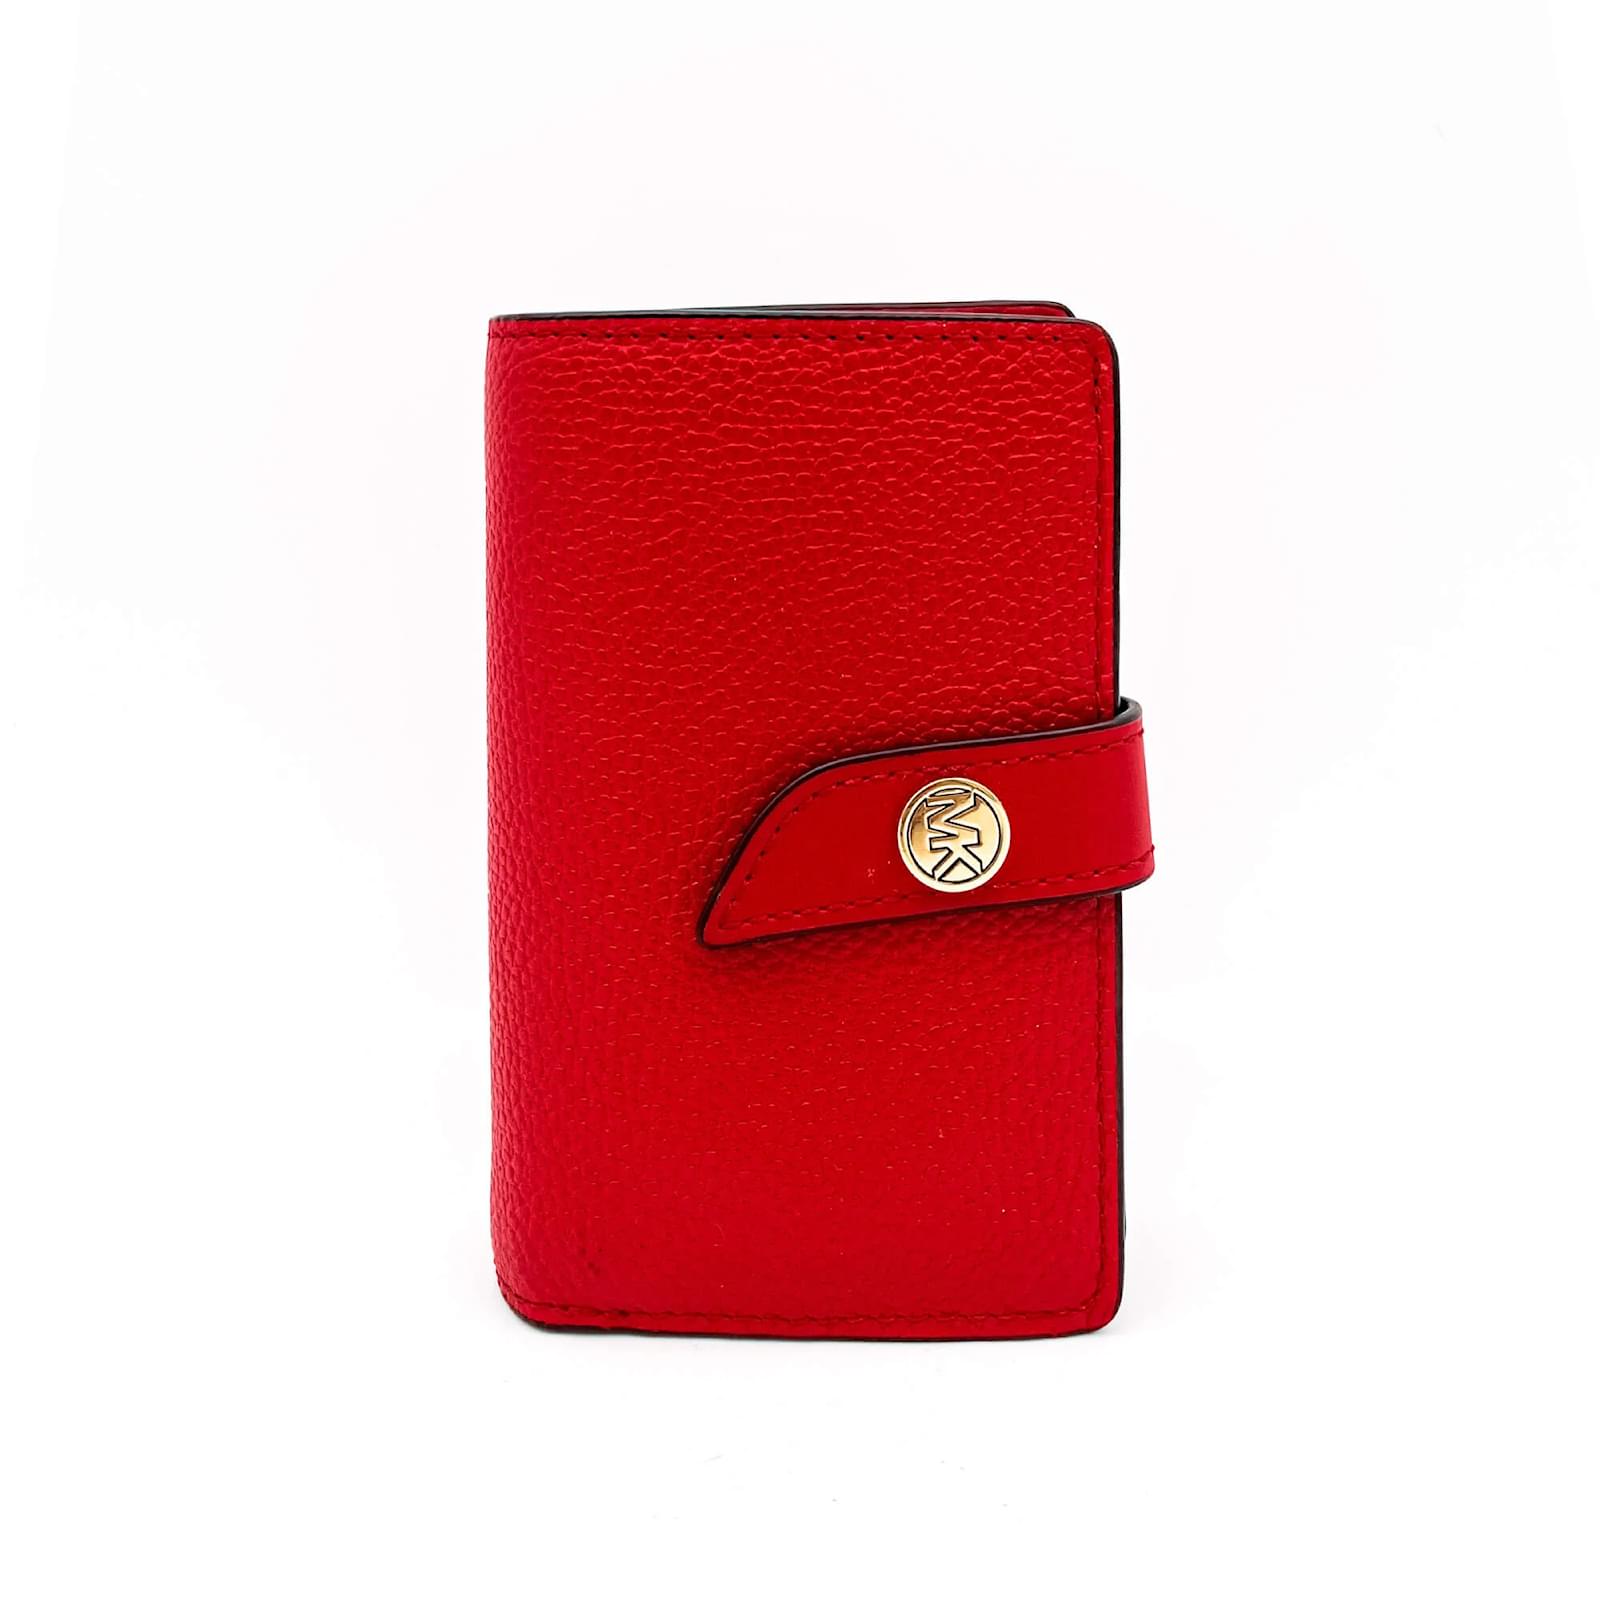 gucci red envelope